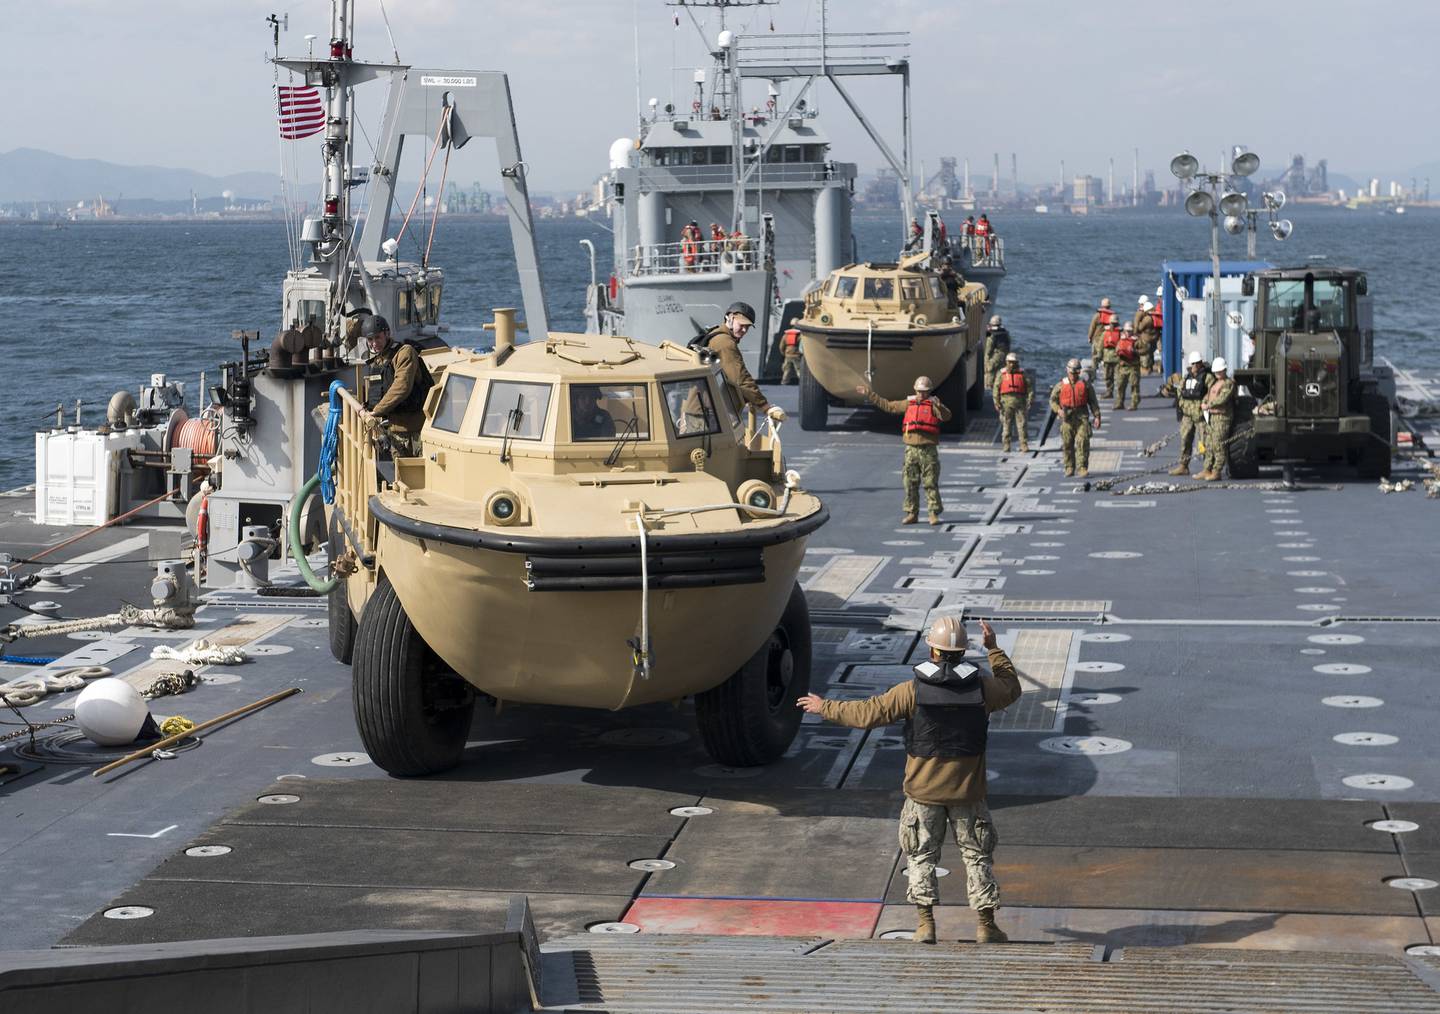 U.S. Navy, Marine Corps and Army personnel offload equipment from the Military Sealift Command maritime prepositioning force ship USNS Pililaau (T-AK 304) on April 10, 2017, in Pohang, South Korea.